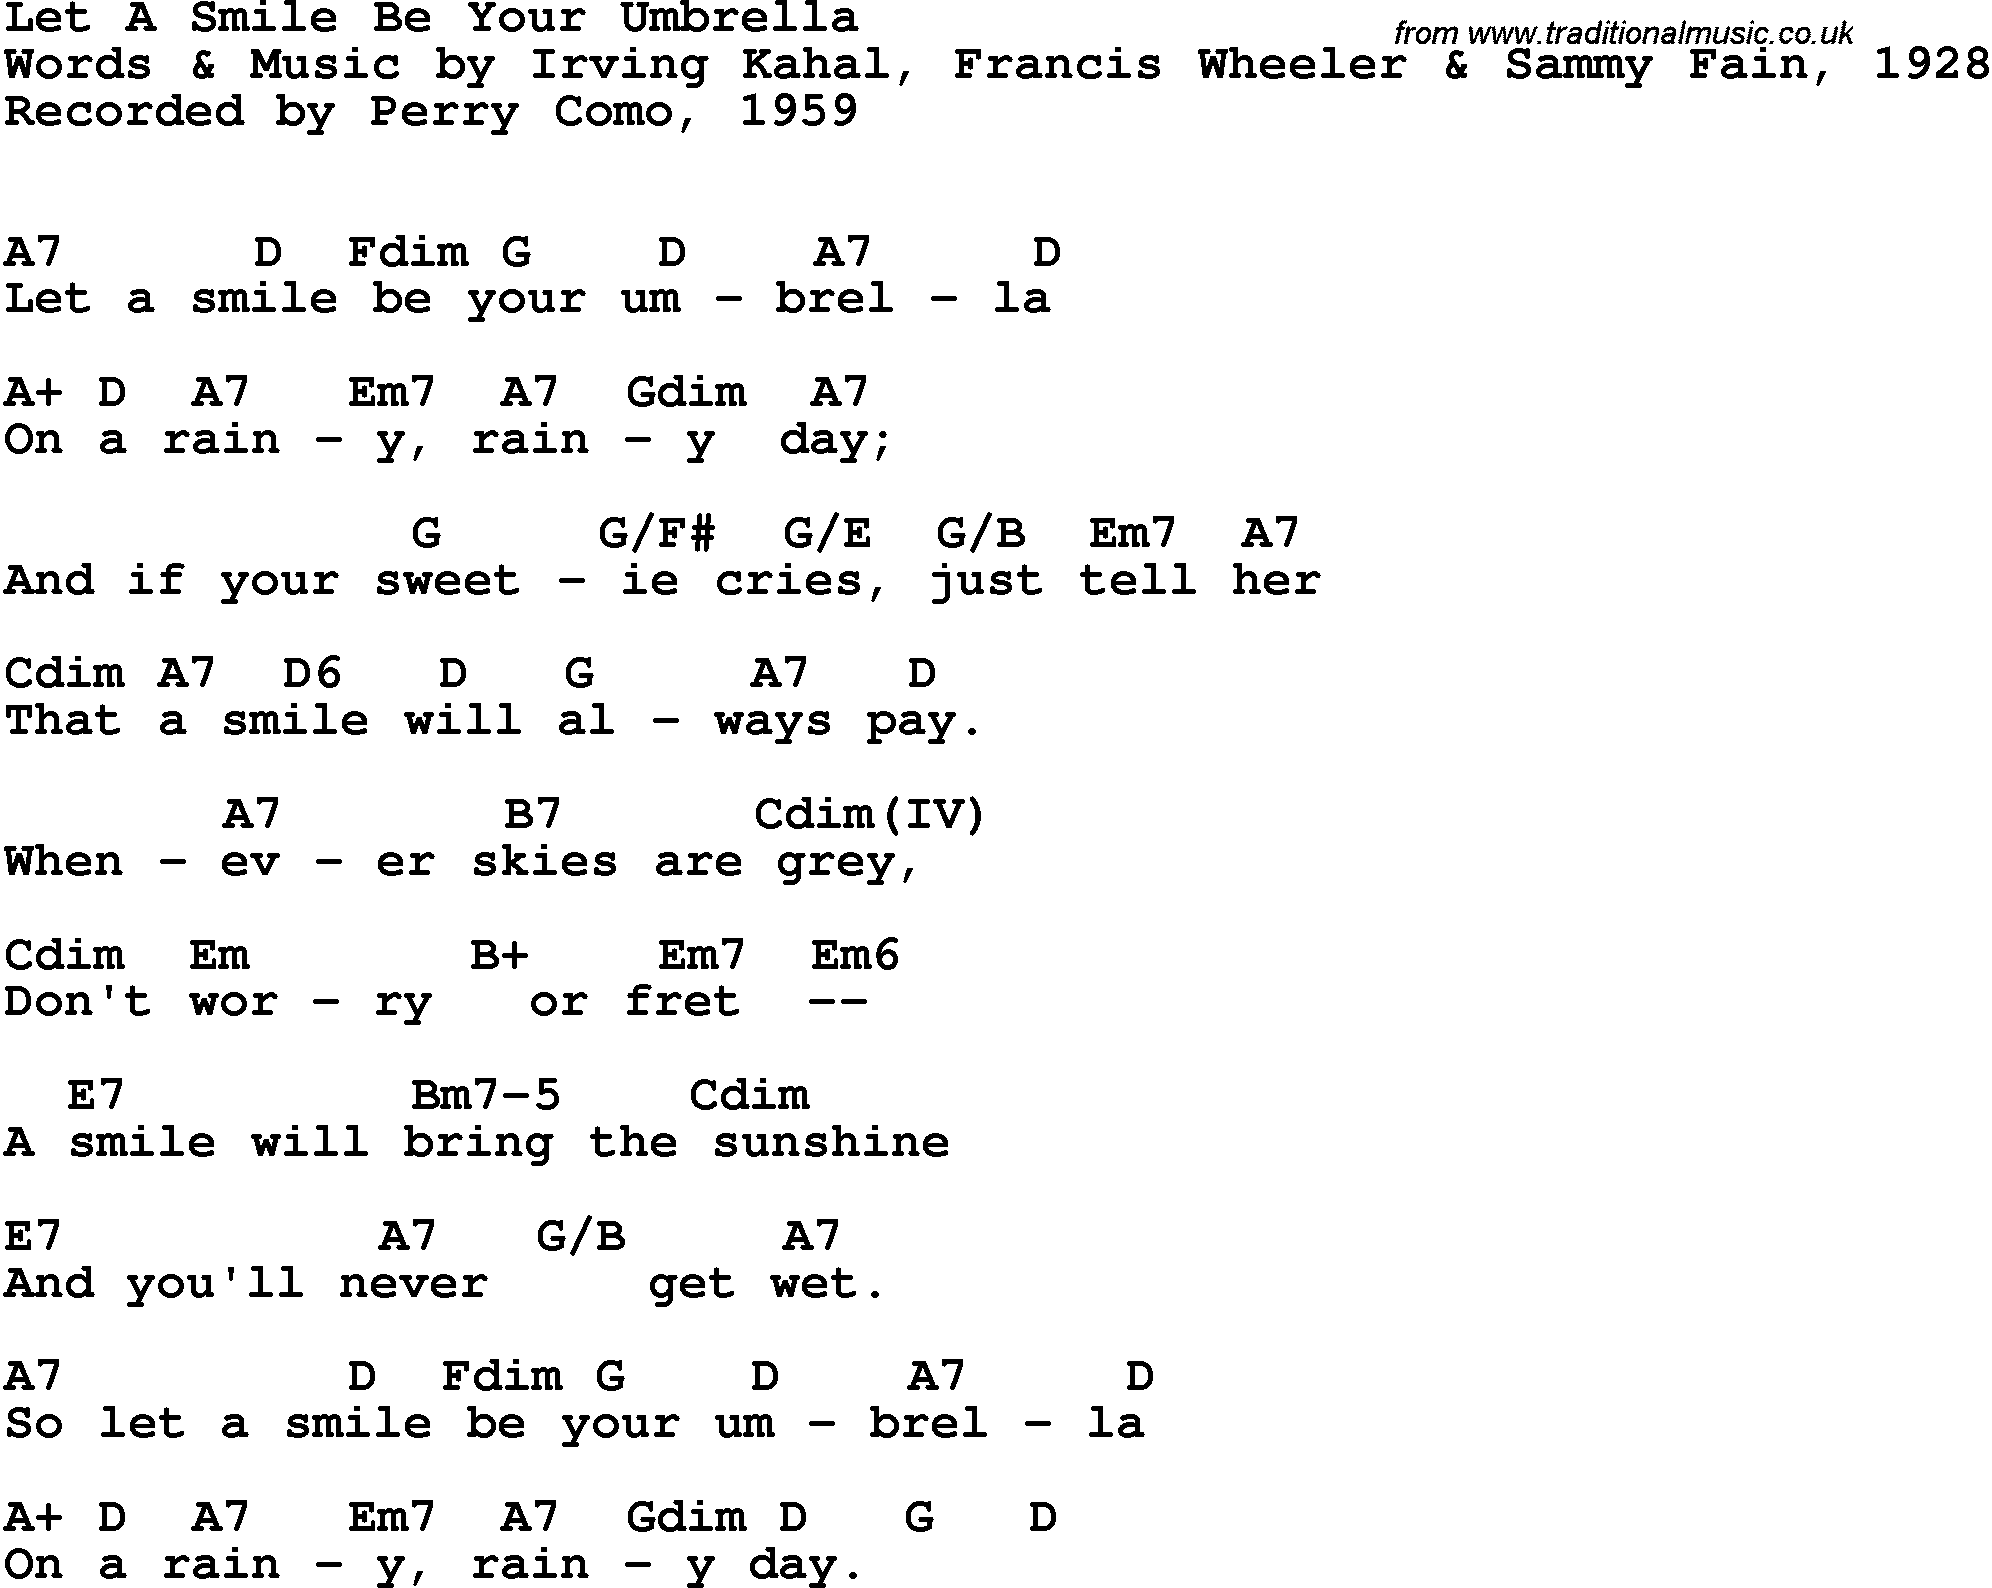 Song Lyrics with guitar chords for Let A Smile Be Your Umbrella - Perry Como, 1959